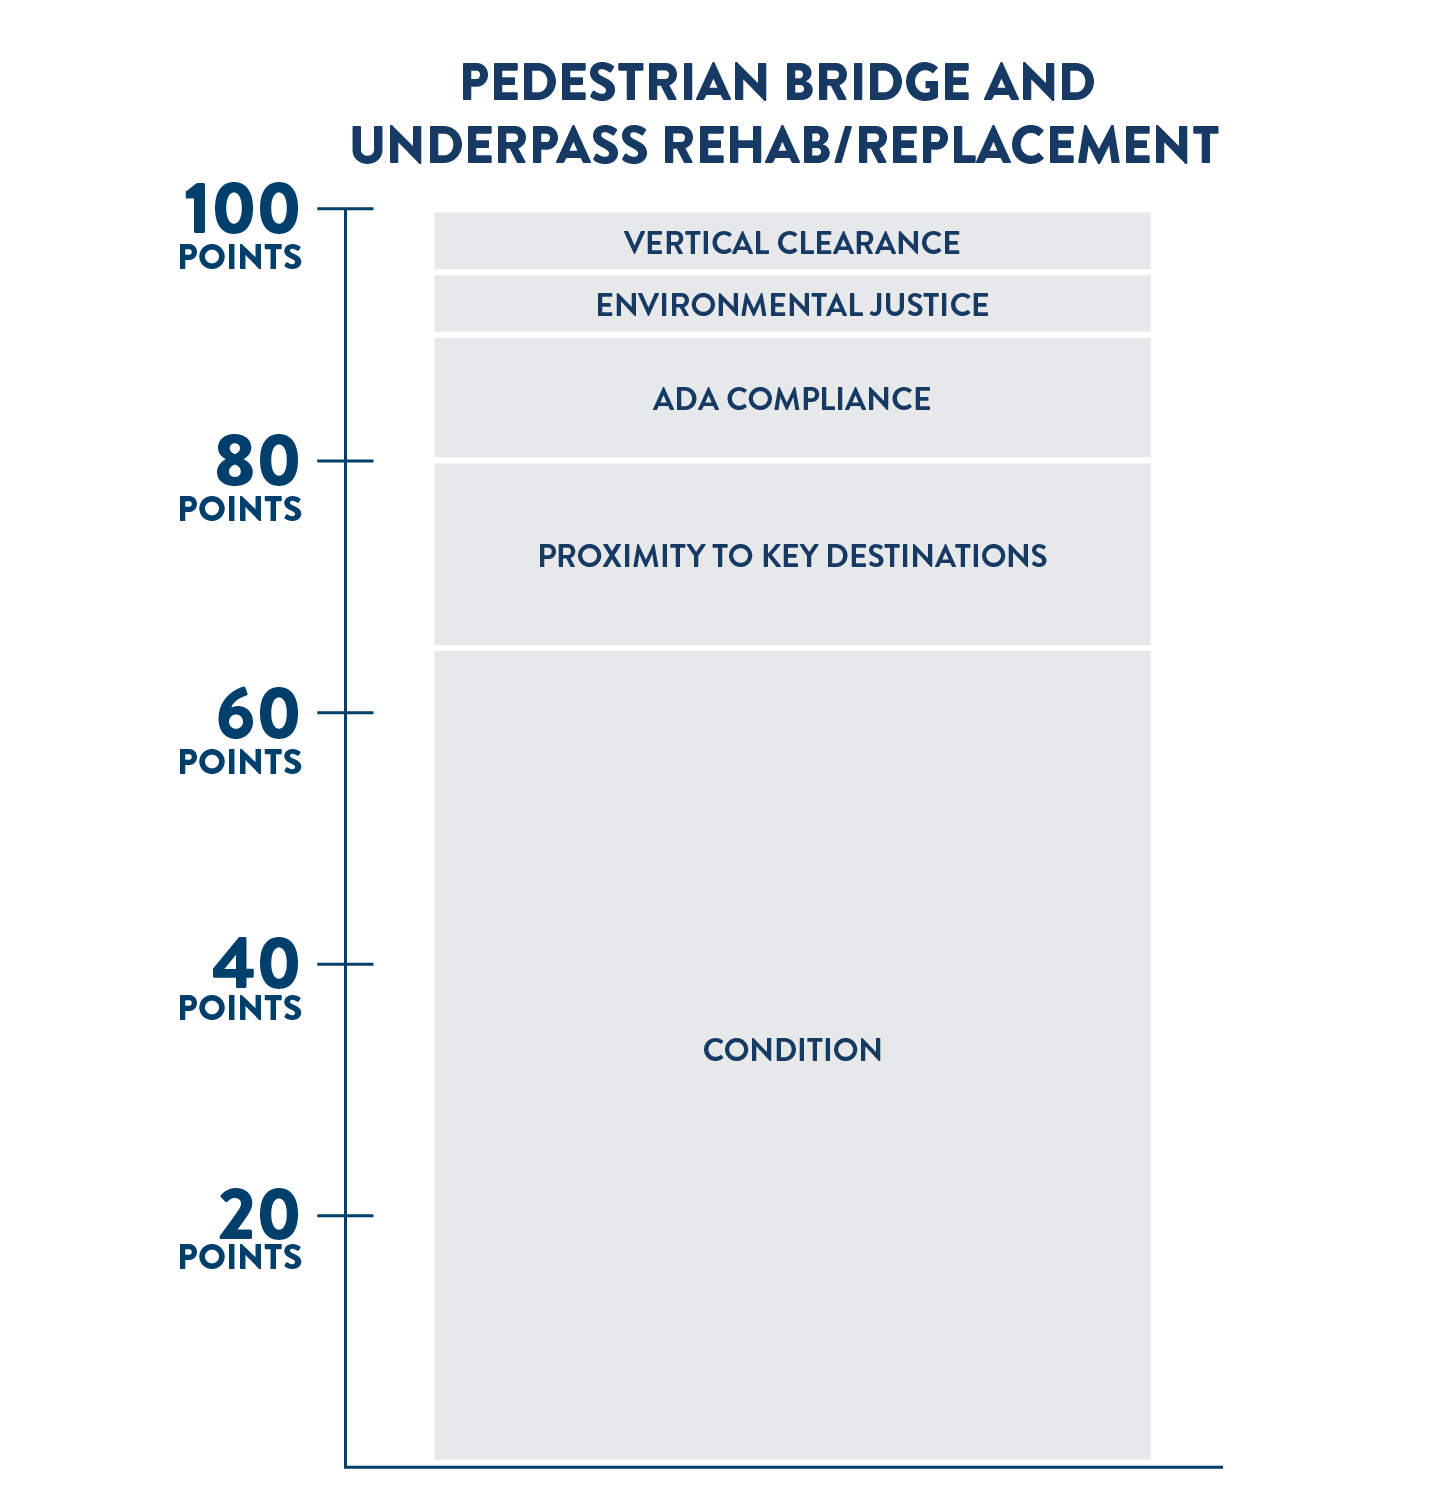 Scoring criteria for standalone projects to rehabilitate or replace pedestrian bridges or underpasses. Out of 100 possible points, 65 points are based on the condition of the bridge, 15 points are based on proximity to key destinations, 10 points based on compliance with Americans with Disability Act, 5 points based on low vertical clearance, and 5 points based on whether the project will benefit an environmental justice population.